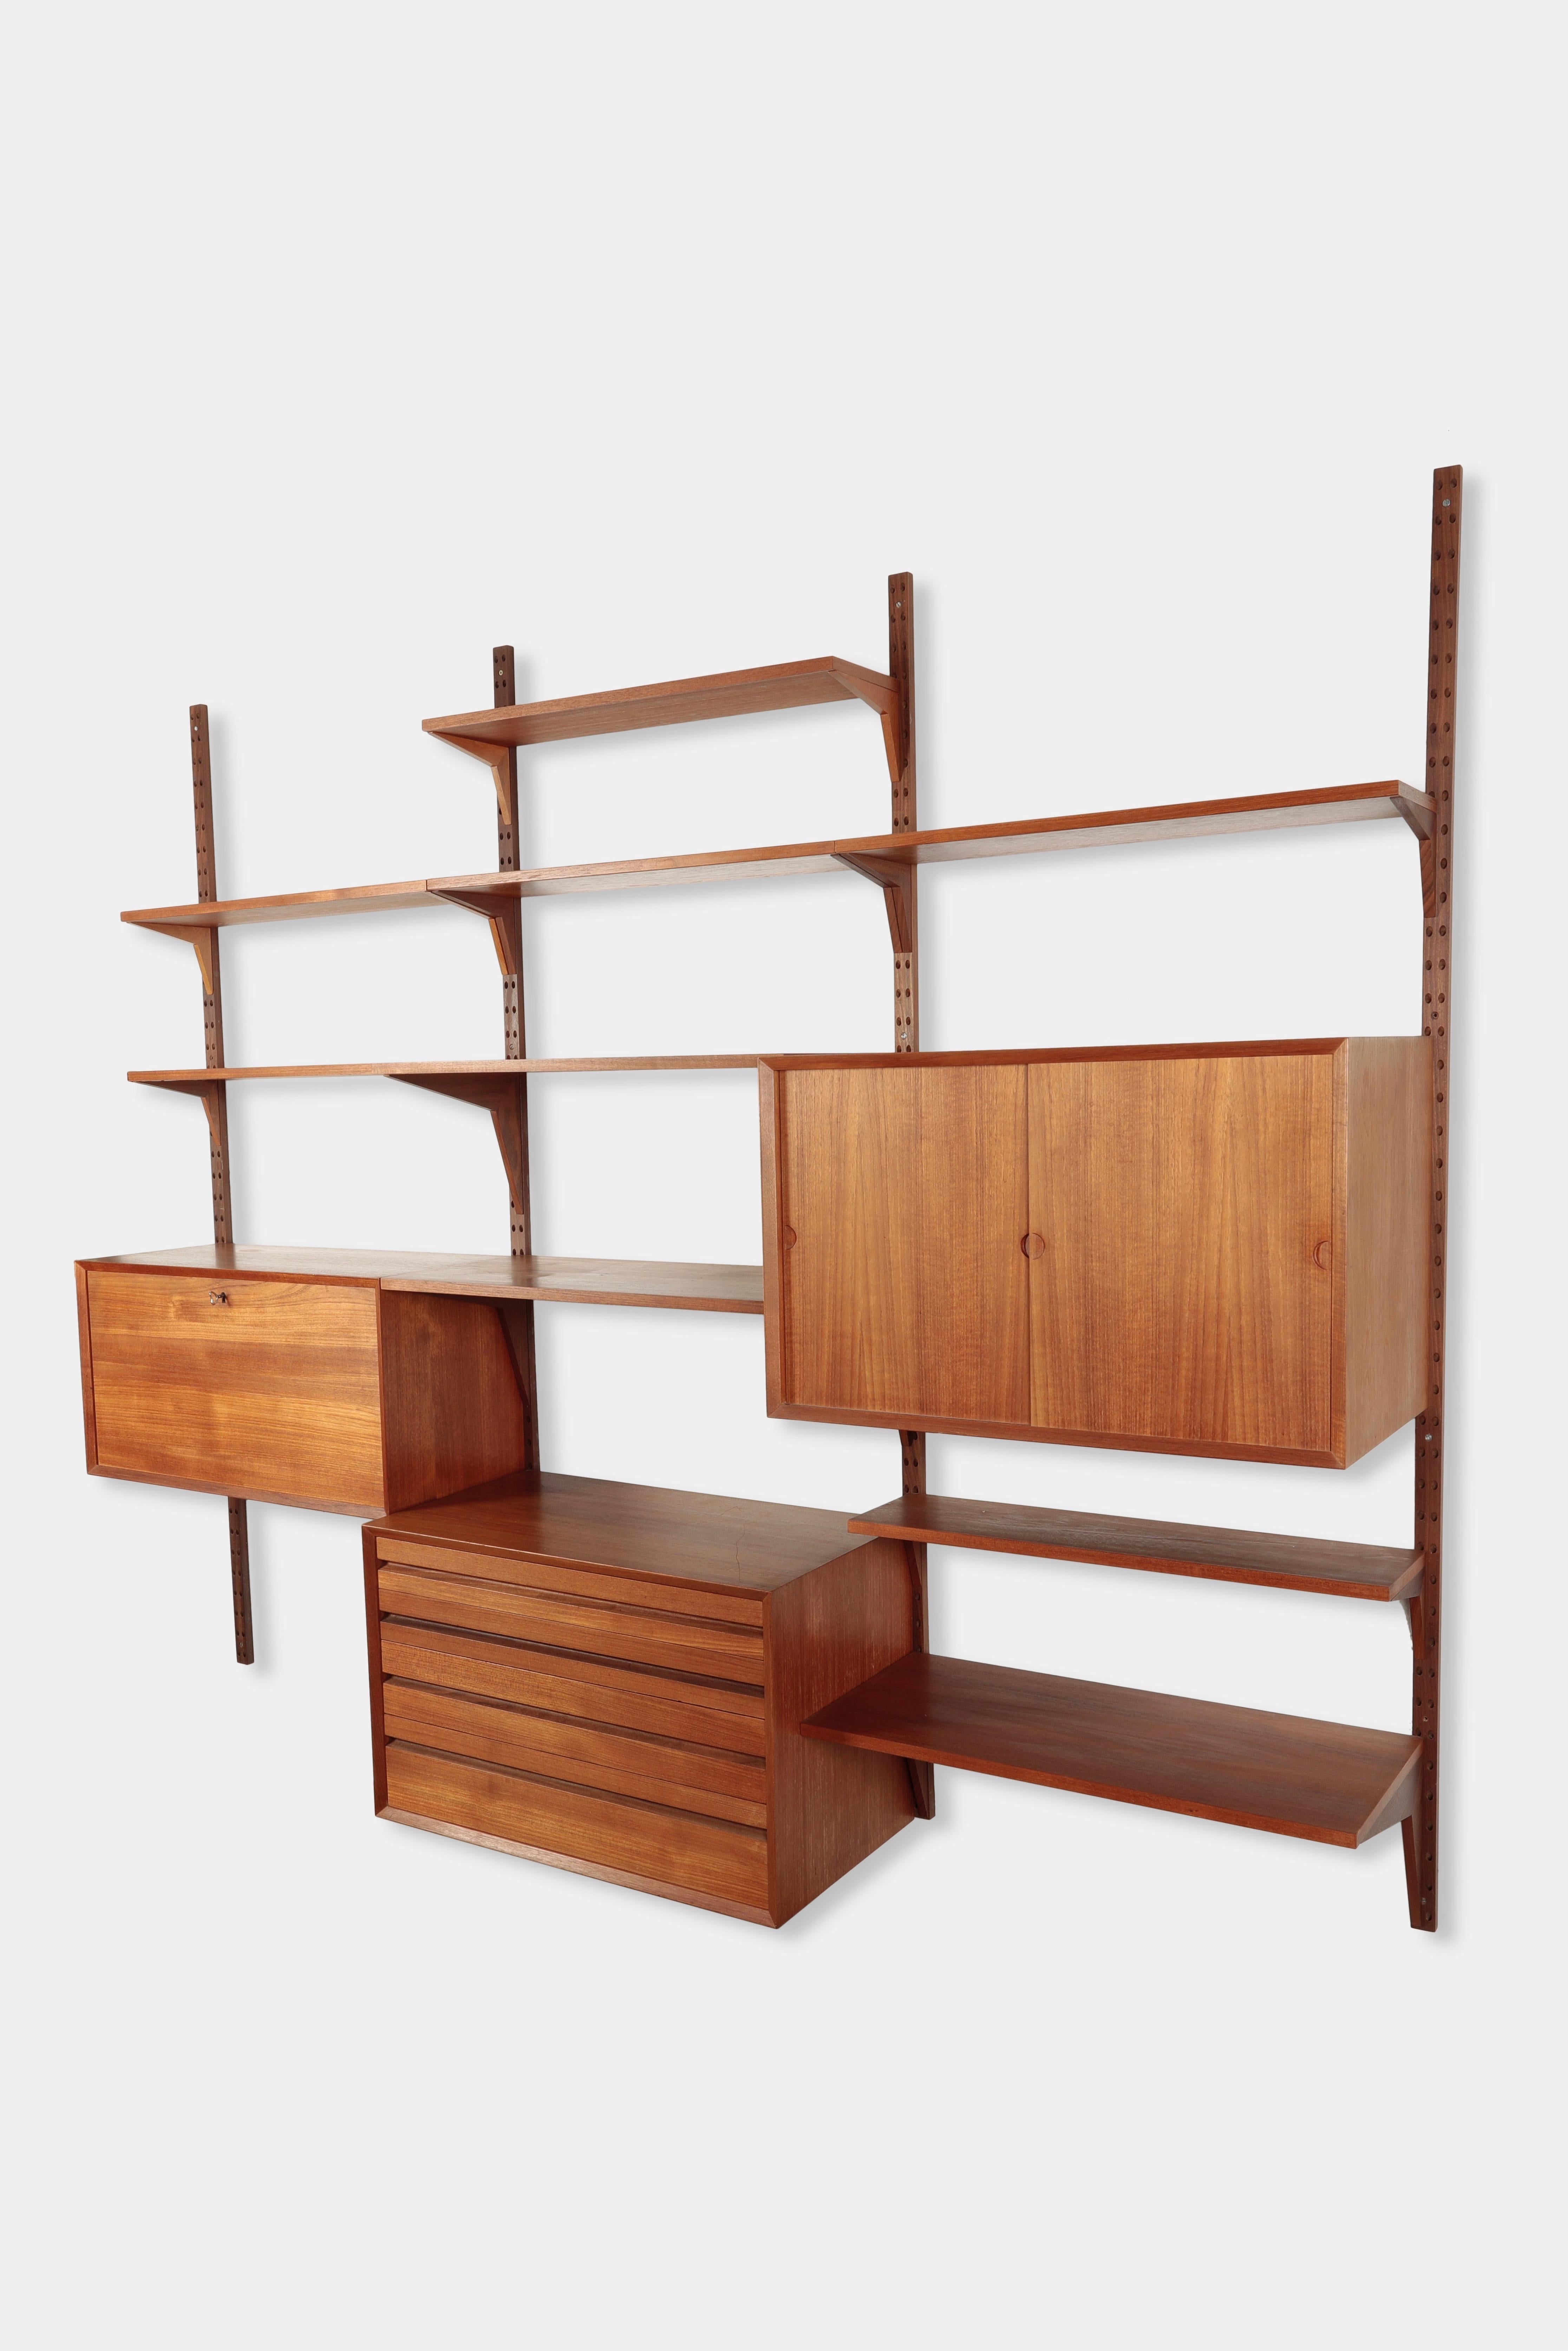 Poul Cadovius “Royal System” wall unit manufactured by Cado in the 1950s in Denmark. Carefuly processed wall unit made of solid teak wood. Three different cabintes with drawers, sliding doors and one hinged door that can be used as a desk and nine